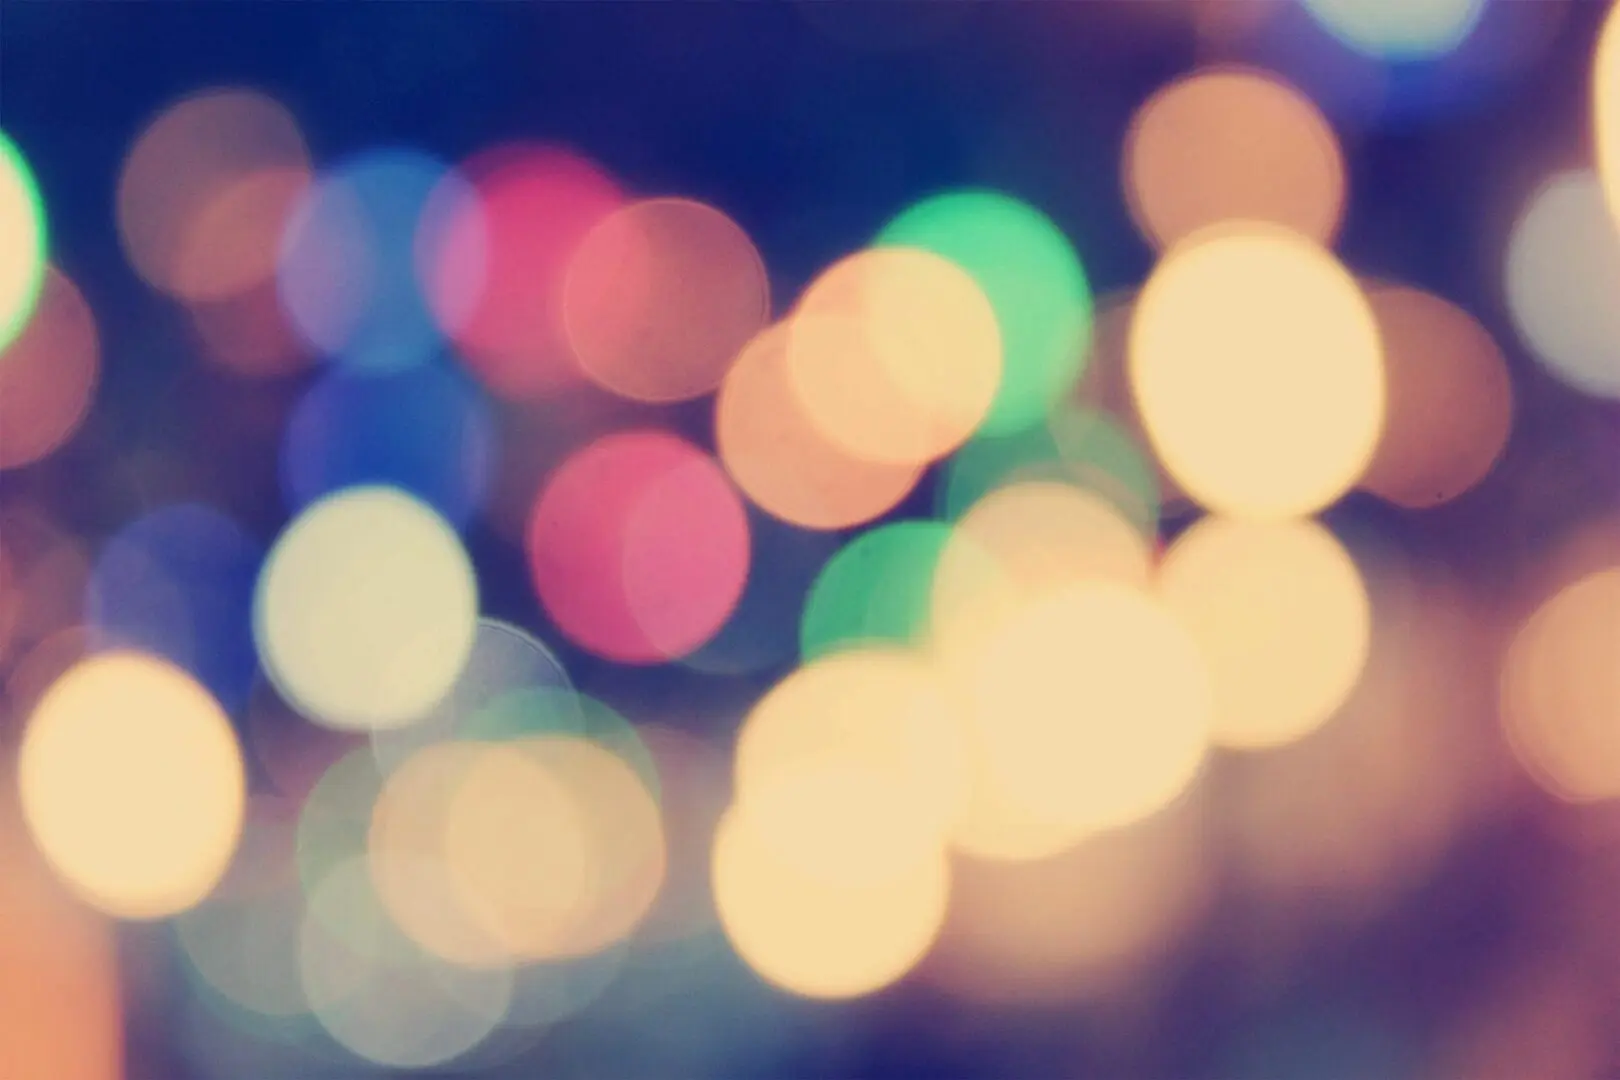 A blurry image of bokeh lights on a dark background.